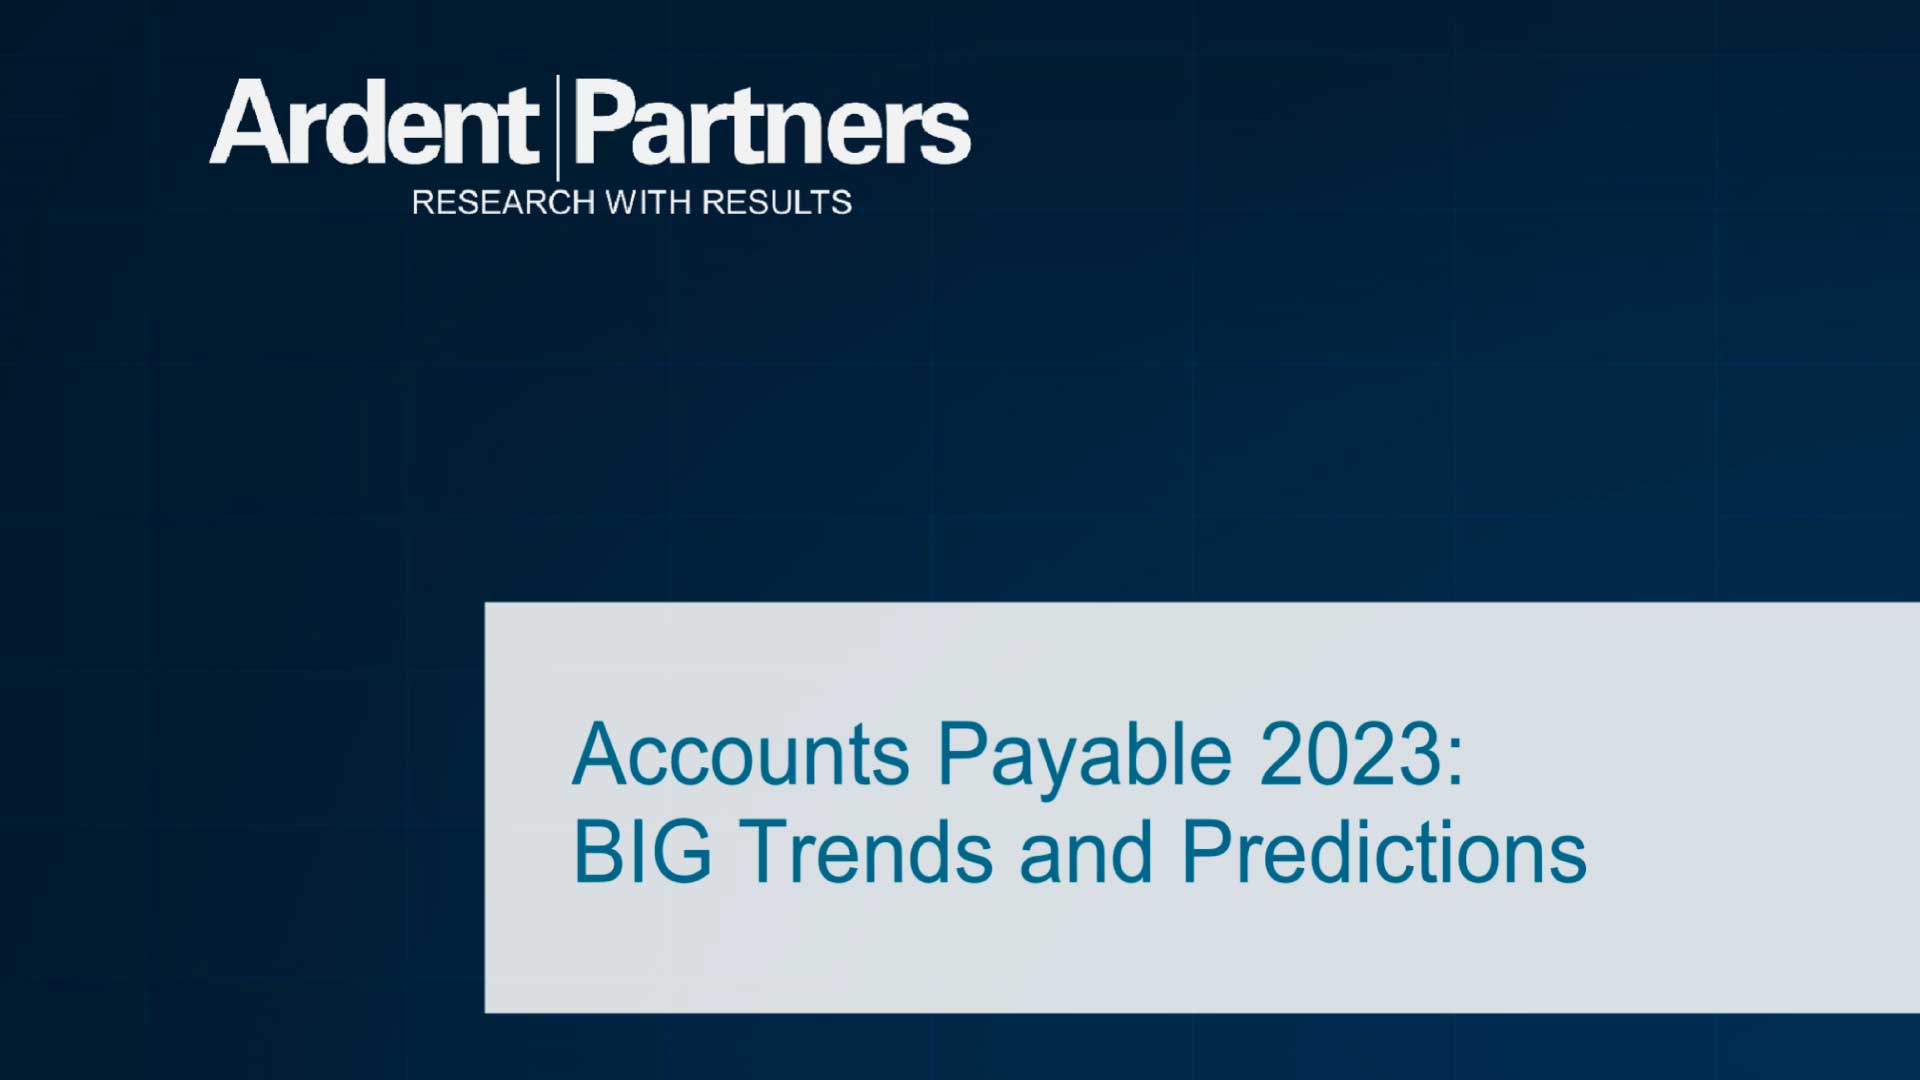 Ardent Partners 2023 AP Trends and Predictions